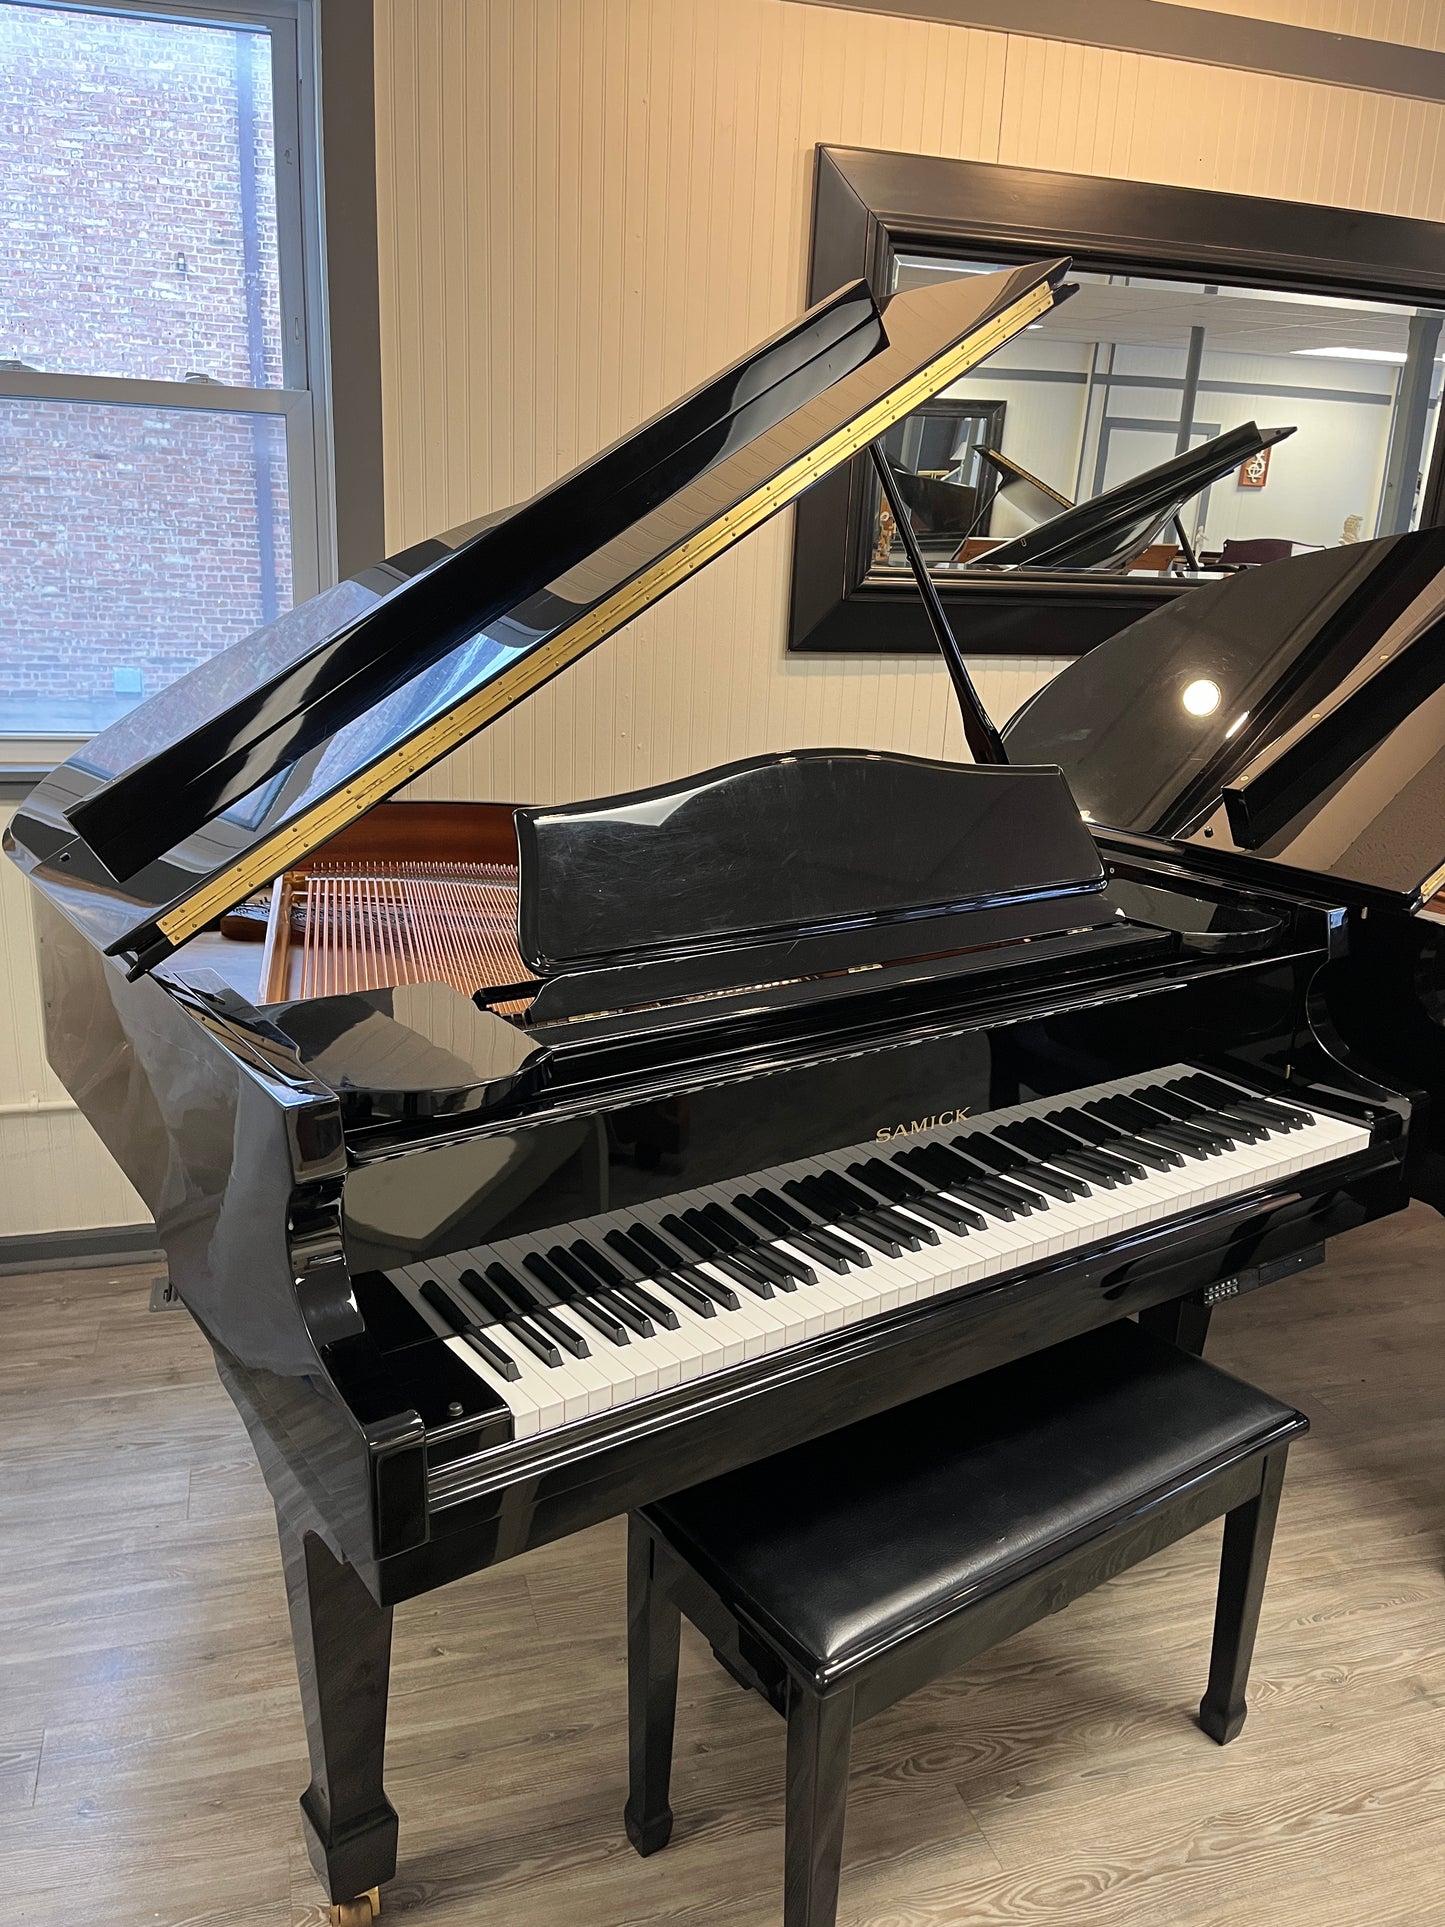 Samick Model SIG-50 5'0” Baby Grand With PianoCD Player (Polished Ebony)